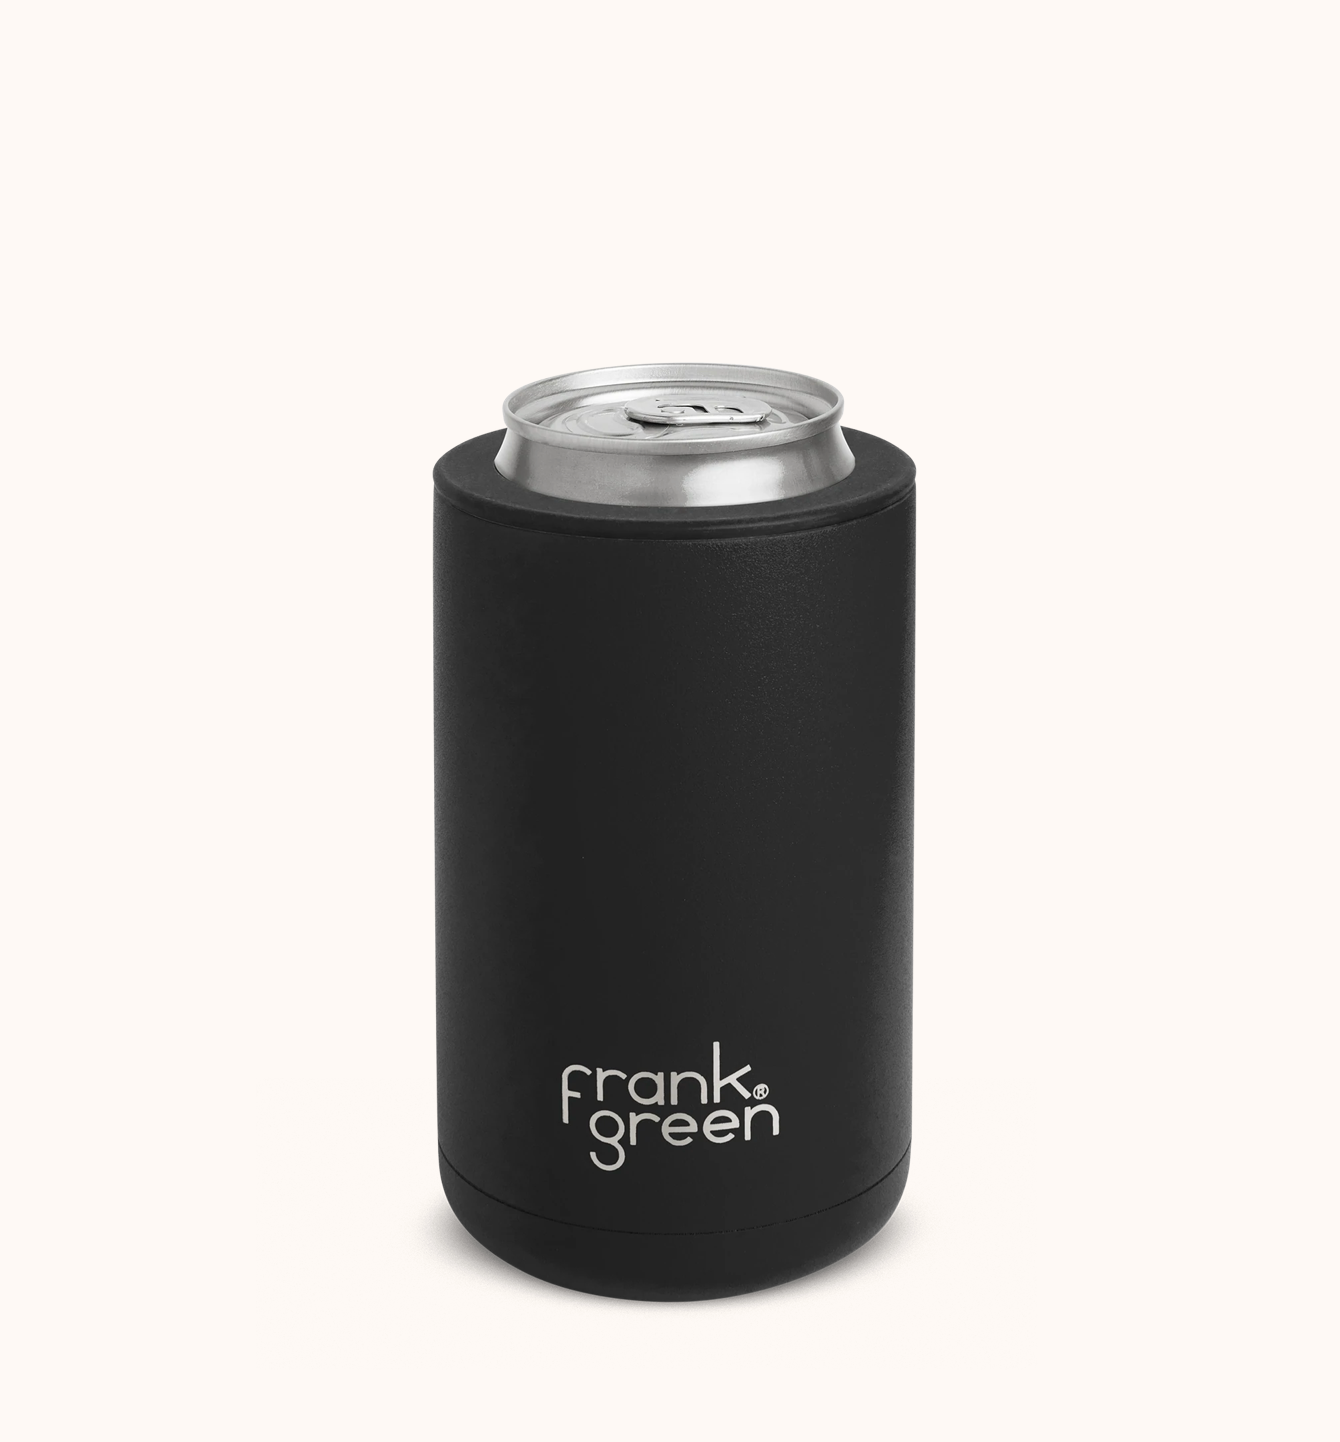 Frank Green 3-in-1 Insulated Reusable Drink Holder 150z (425ml), Midnight